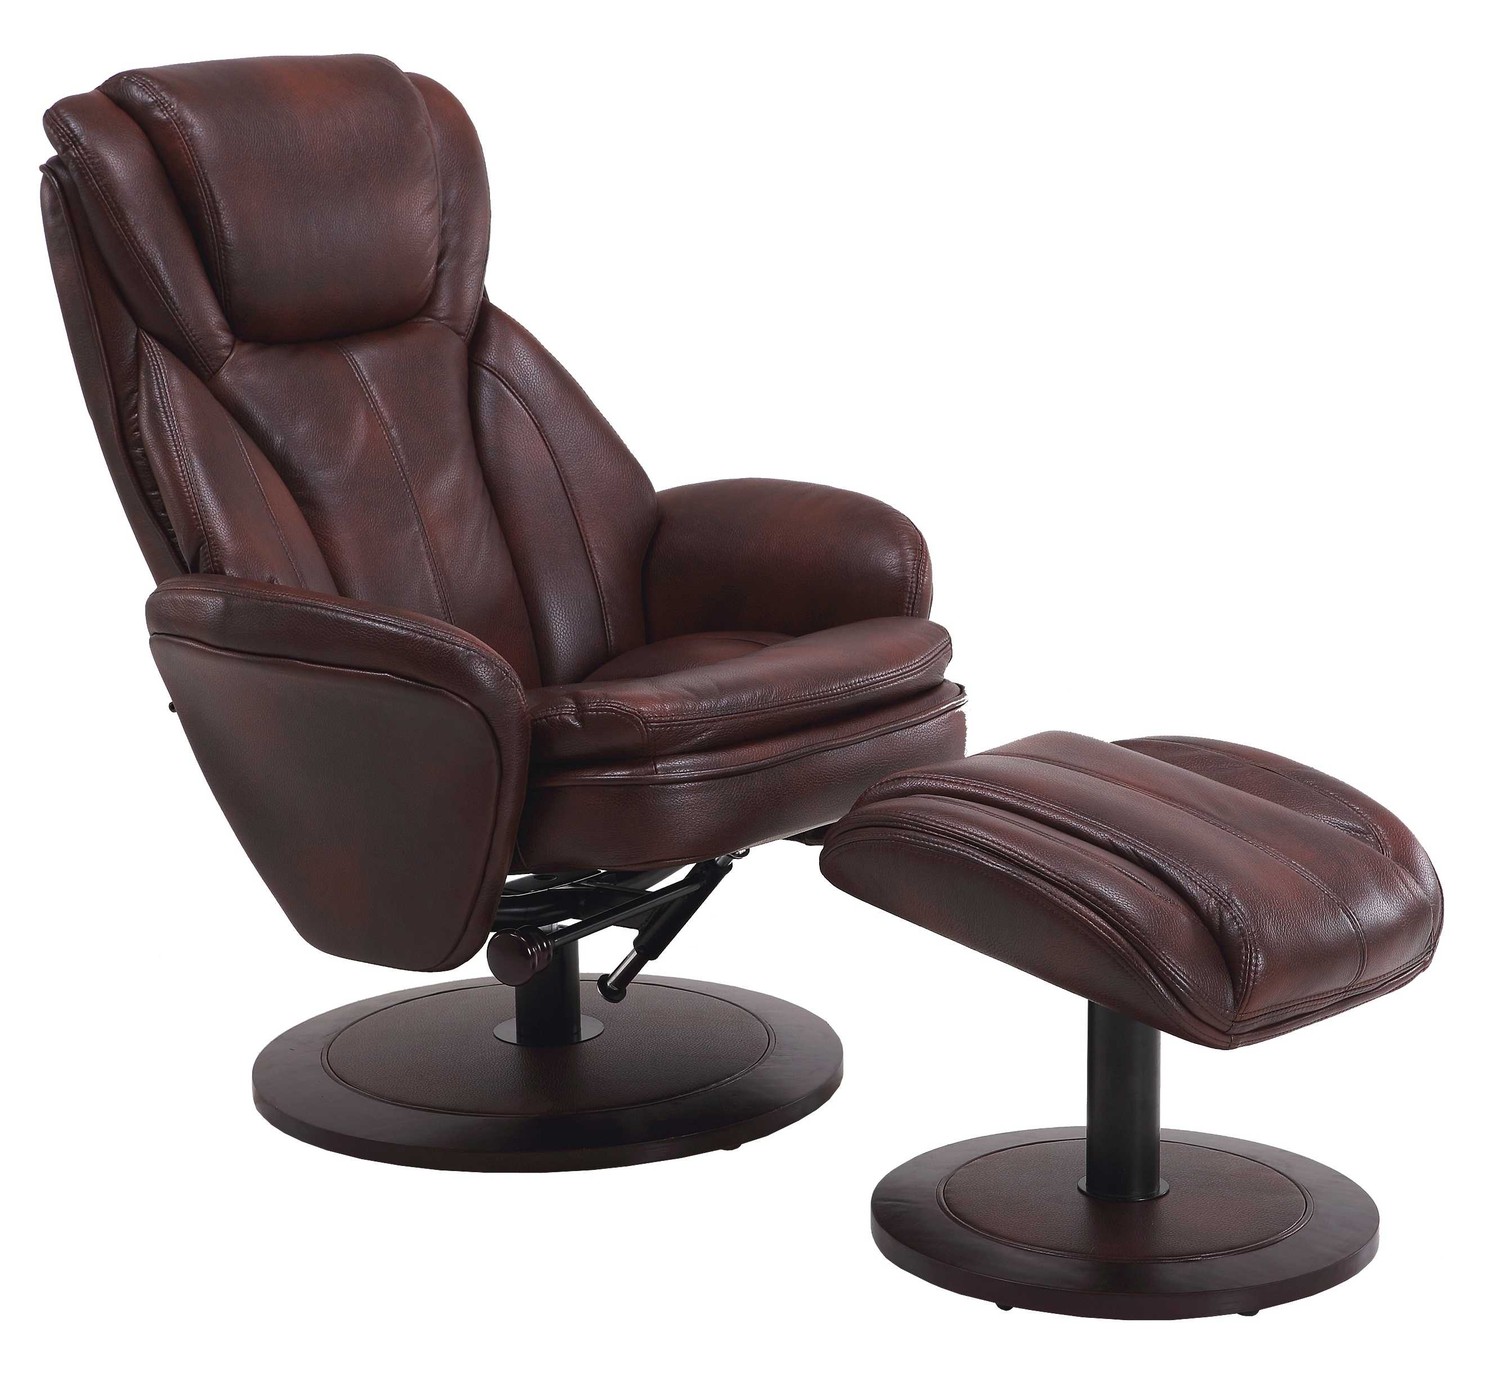 Comfy Dark Brown Faux Leather Recliner and Ottoman Set